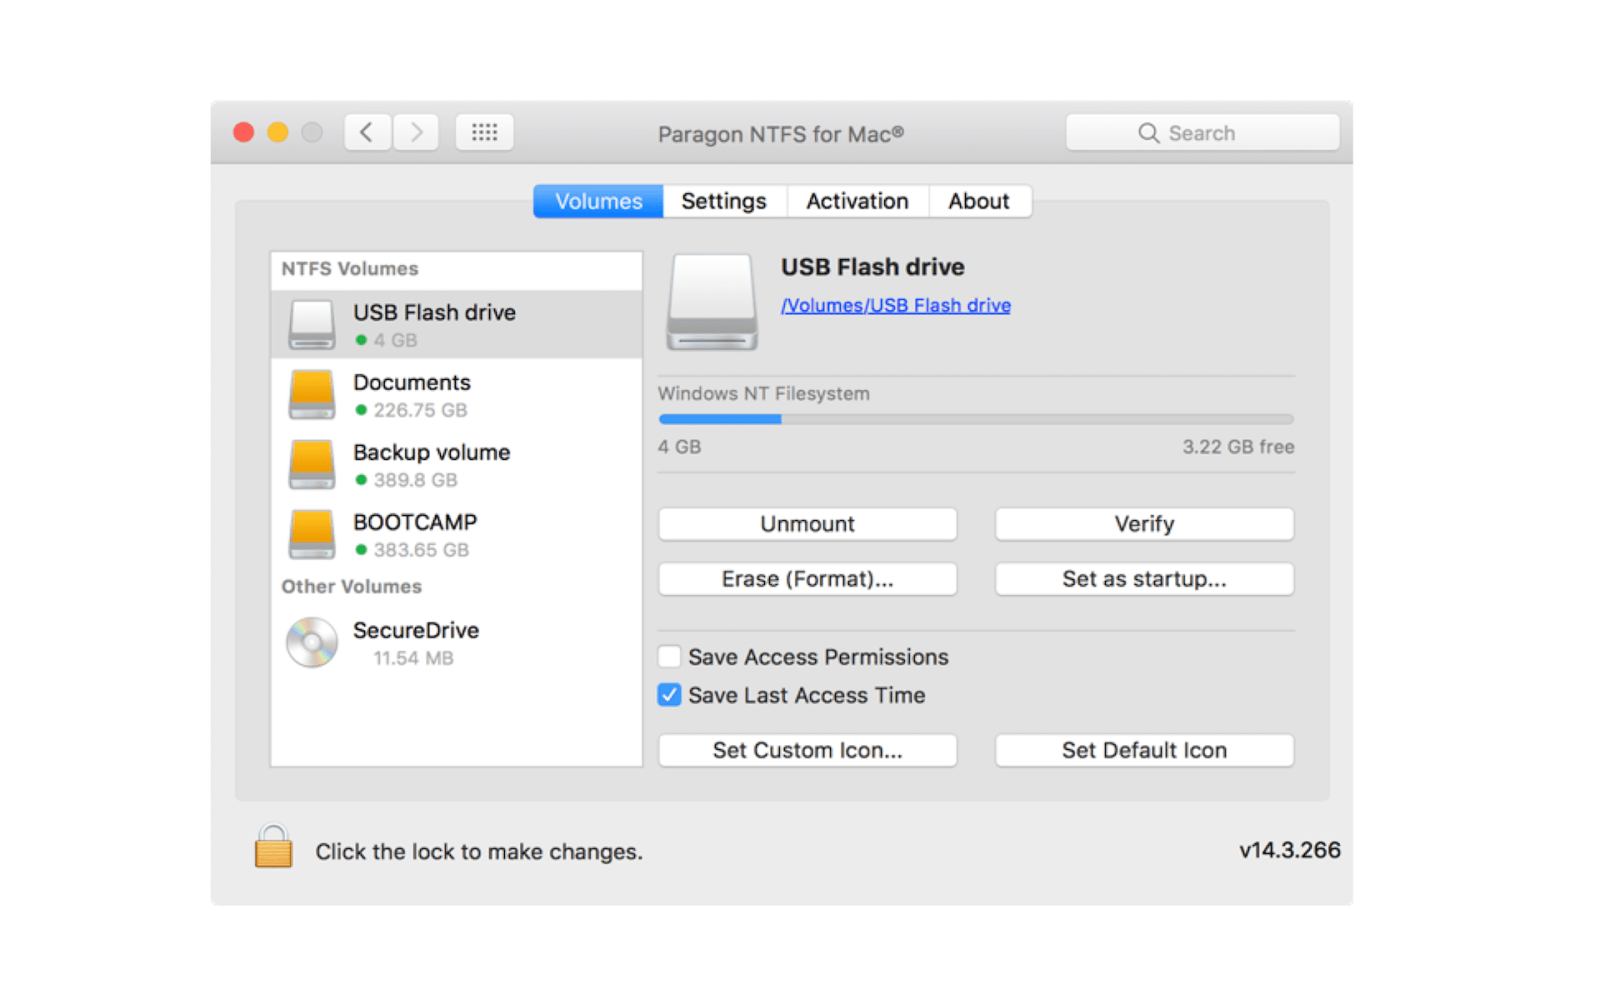 could not load paragon ntfs for mac os x preference pane.